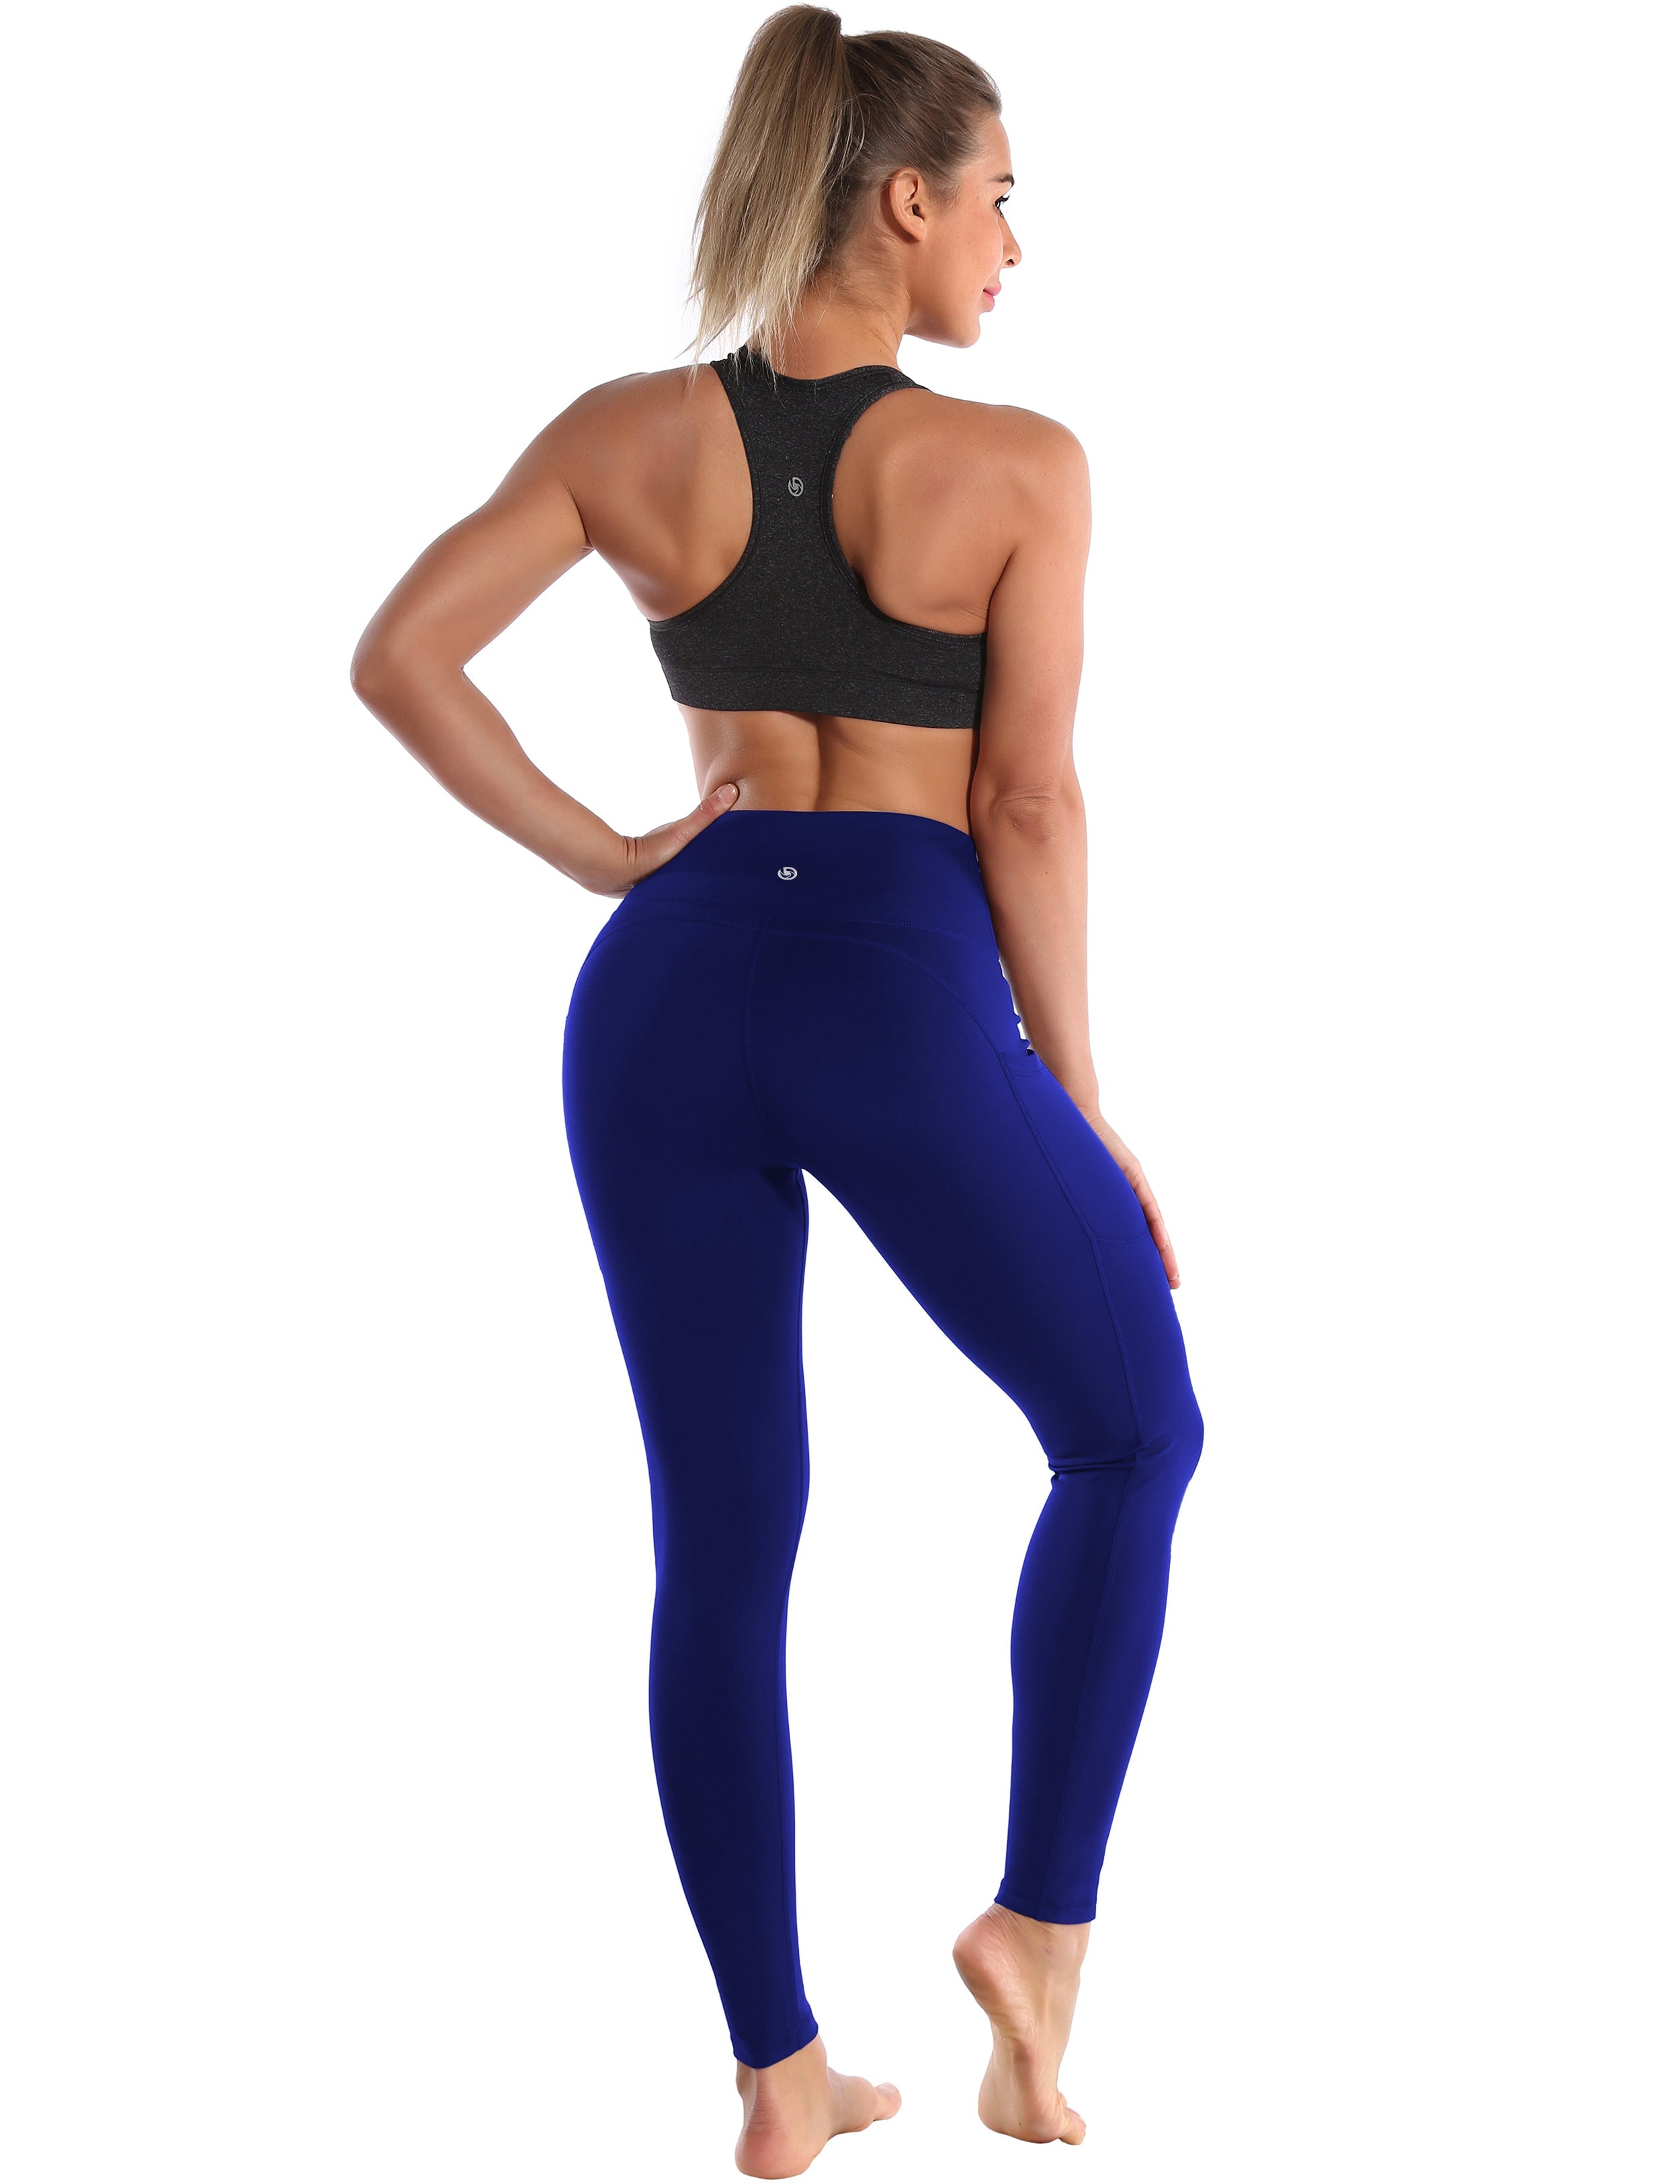 Hip Line Side Pockets Golf Pants navy Sexy Hip Line Side Pockets 75%Nylon/25%Spandex Fabric doesn't attract lint easily 4-way stretch No see-through Moisture-wicking Tummy control Inner pocket Two lengths